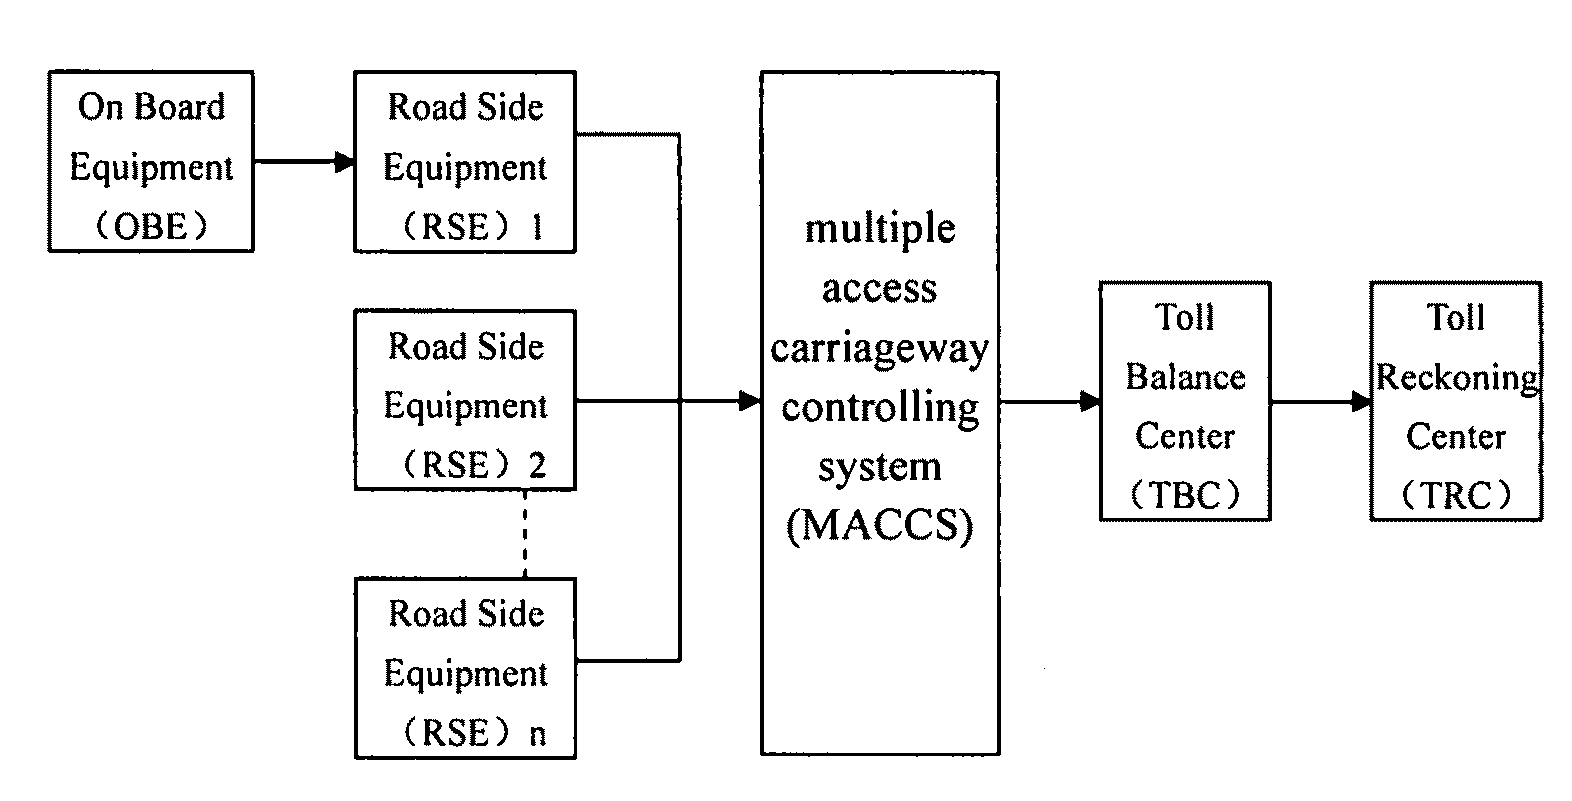 WLAN-based no-stop electronic toll collection system and the implementation thereof